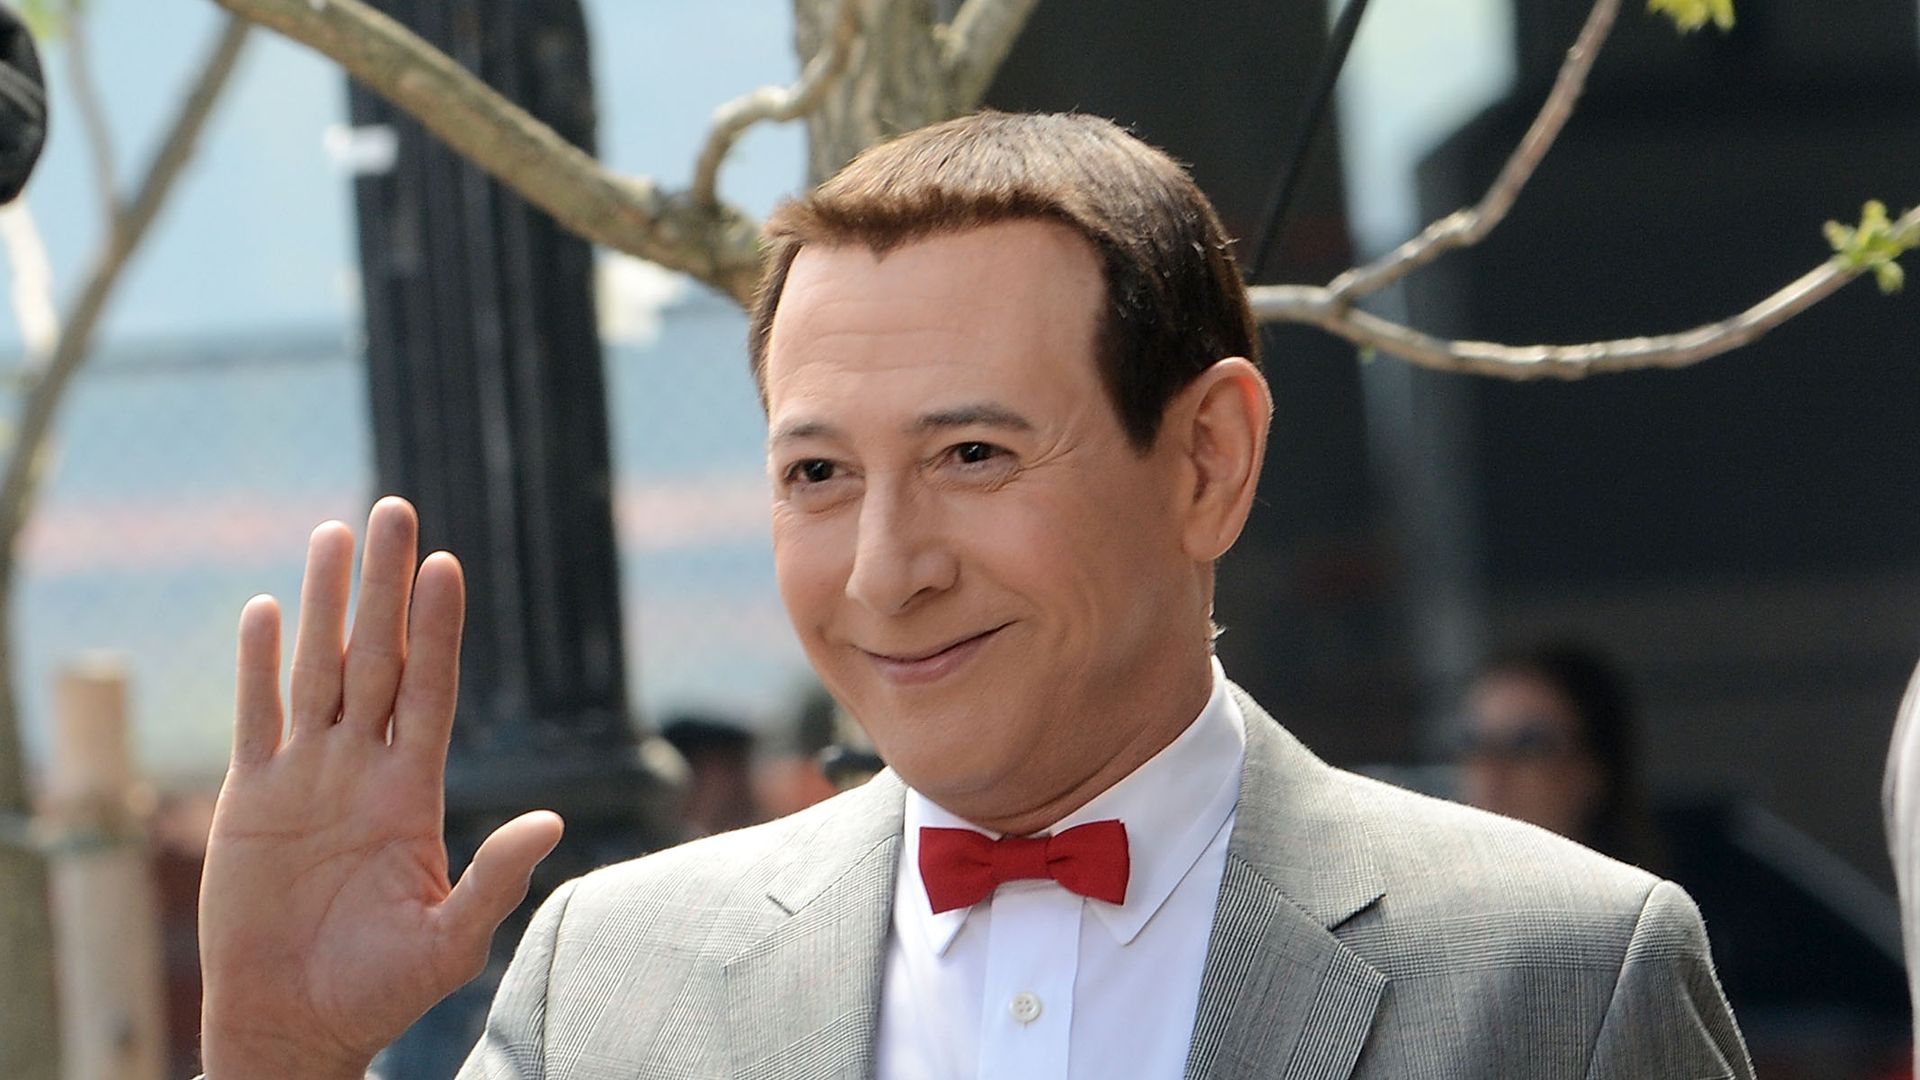 Paul Reubens on location filming "Pee-wee's Big Holiday" on May 8, 2015 in New York City